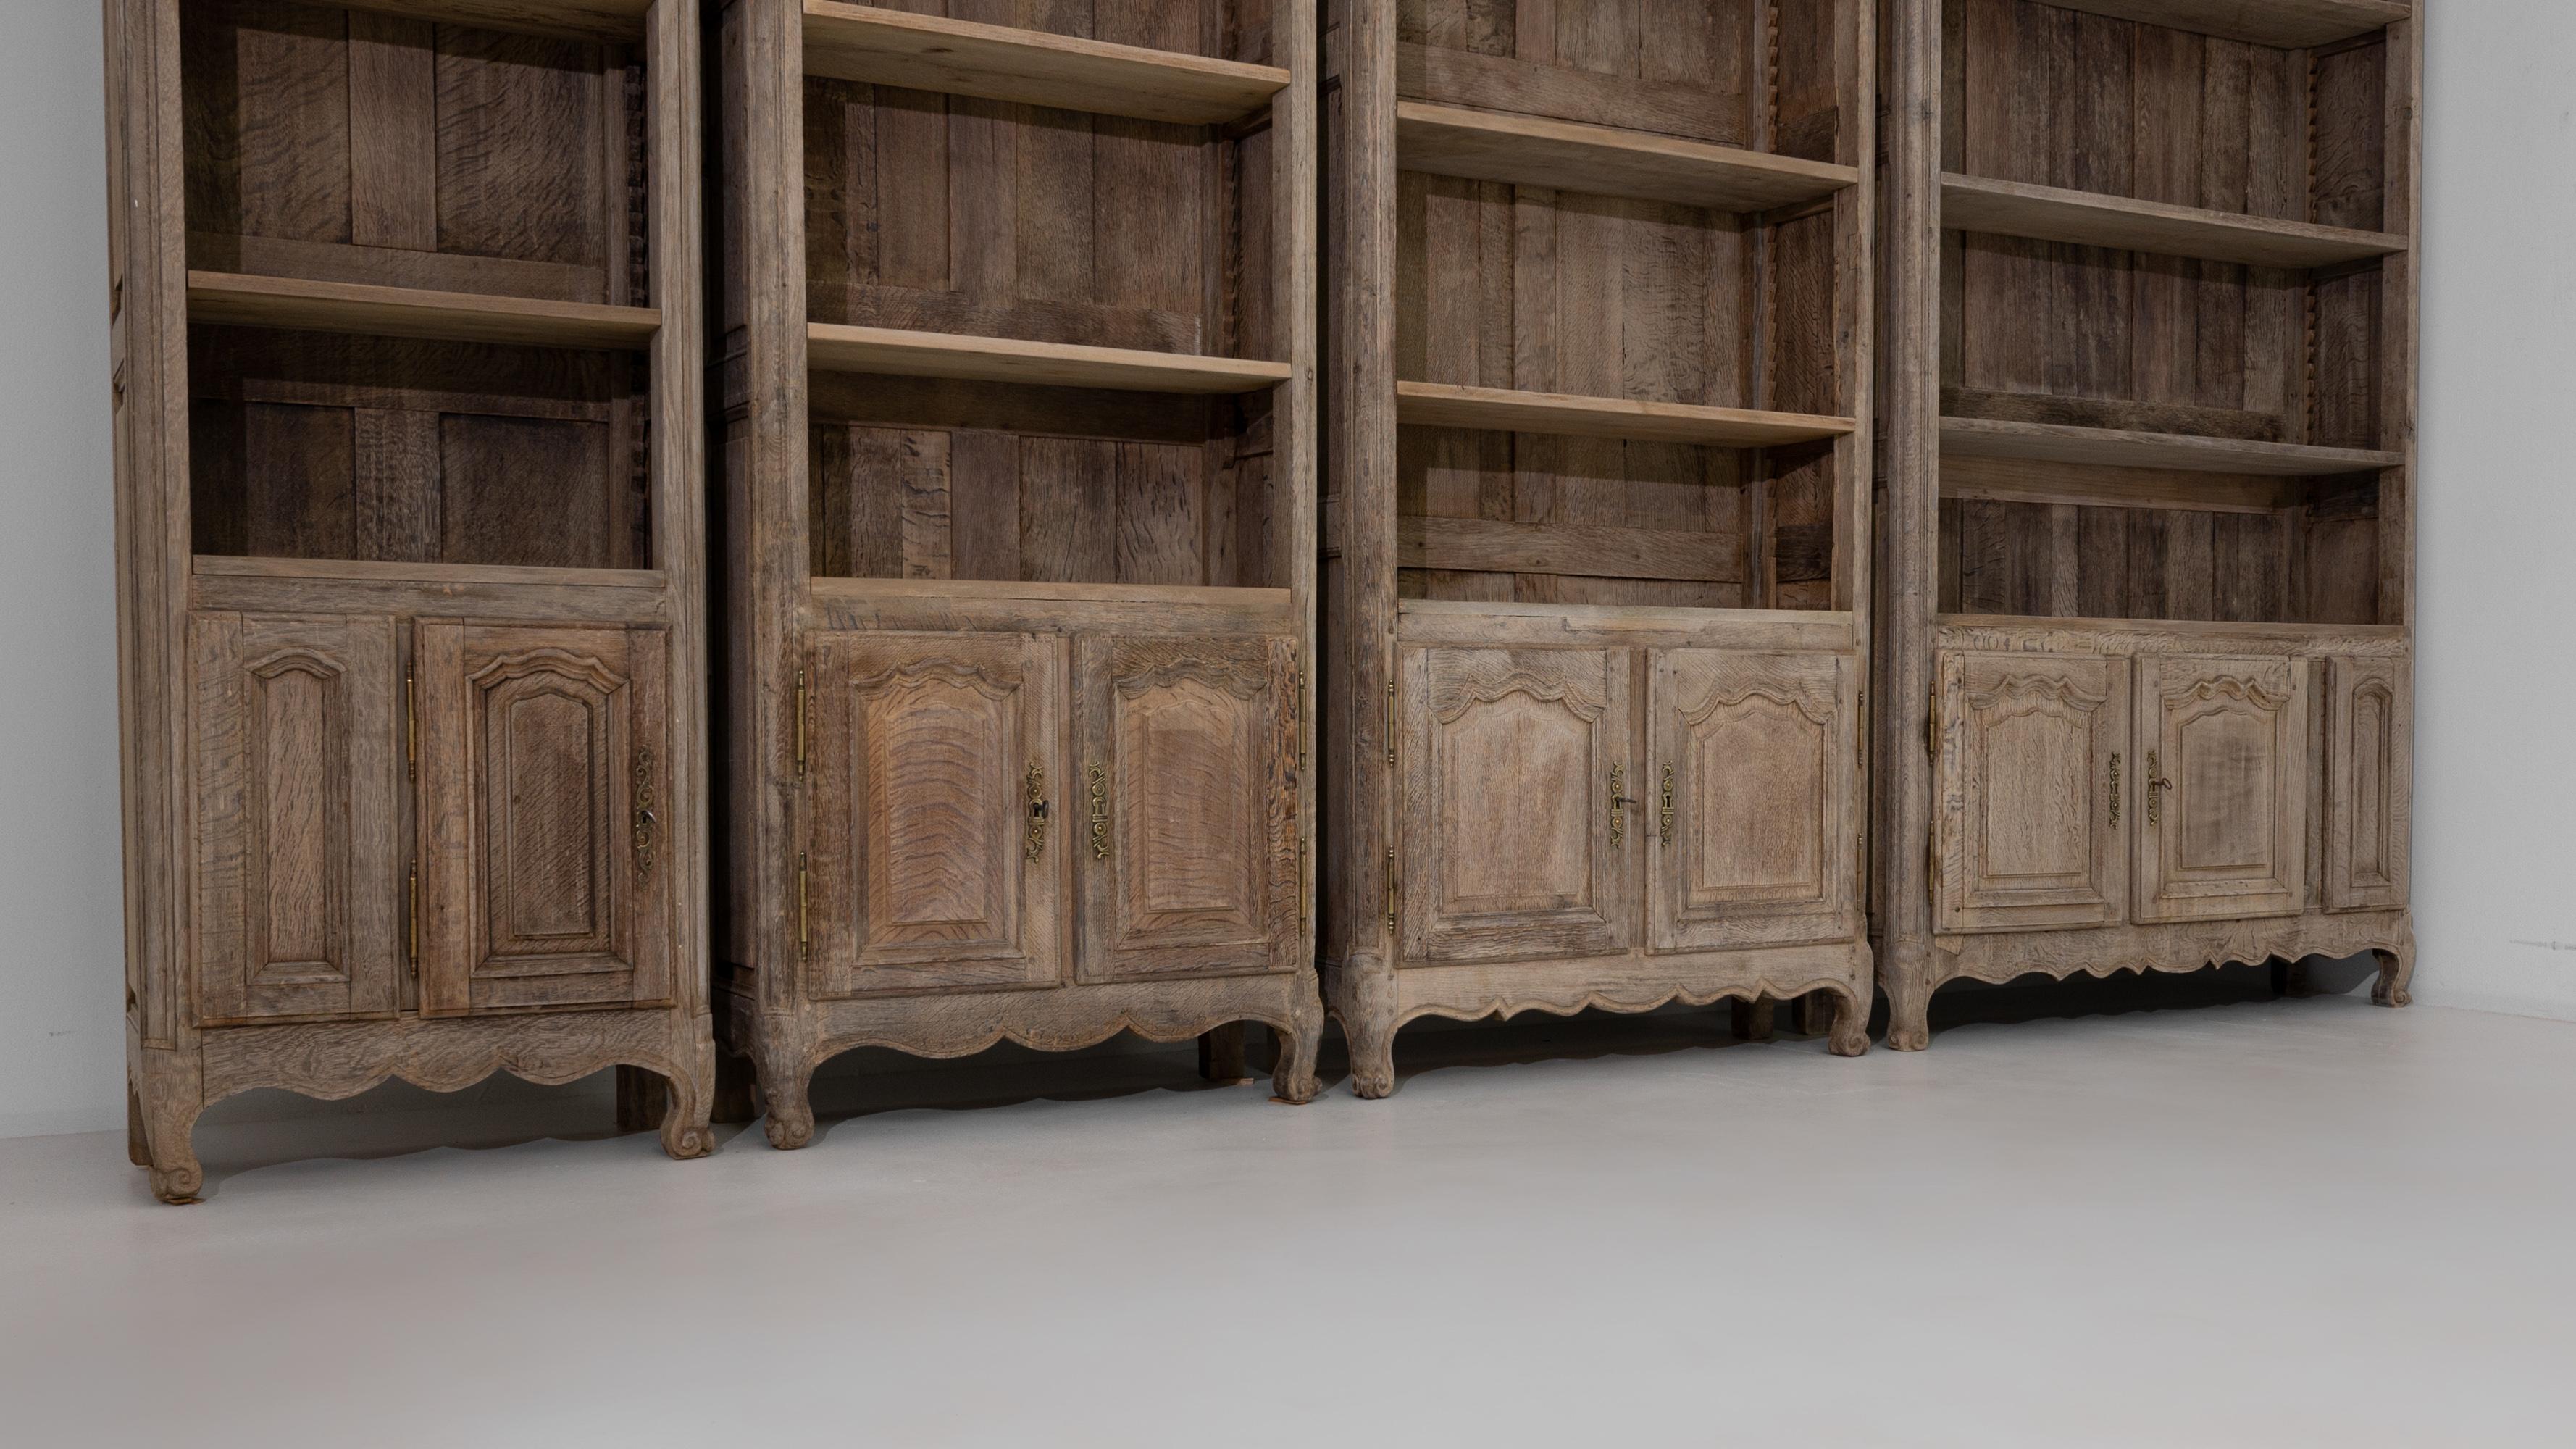 This set of four oak cabinets provides an accommodating storage solution with a vintage elegance. Built in Belgium in the 20th Century, paneled cupboards and scrolled cabriole feet form an elegant base from which rises a simple sequence of shelves.